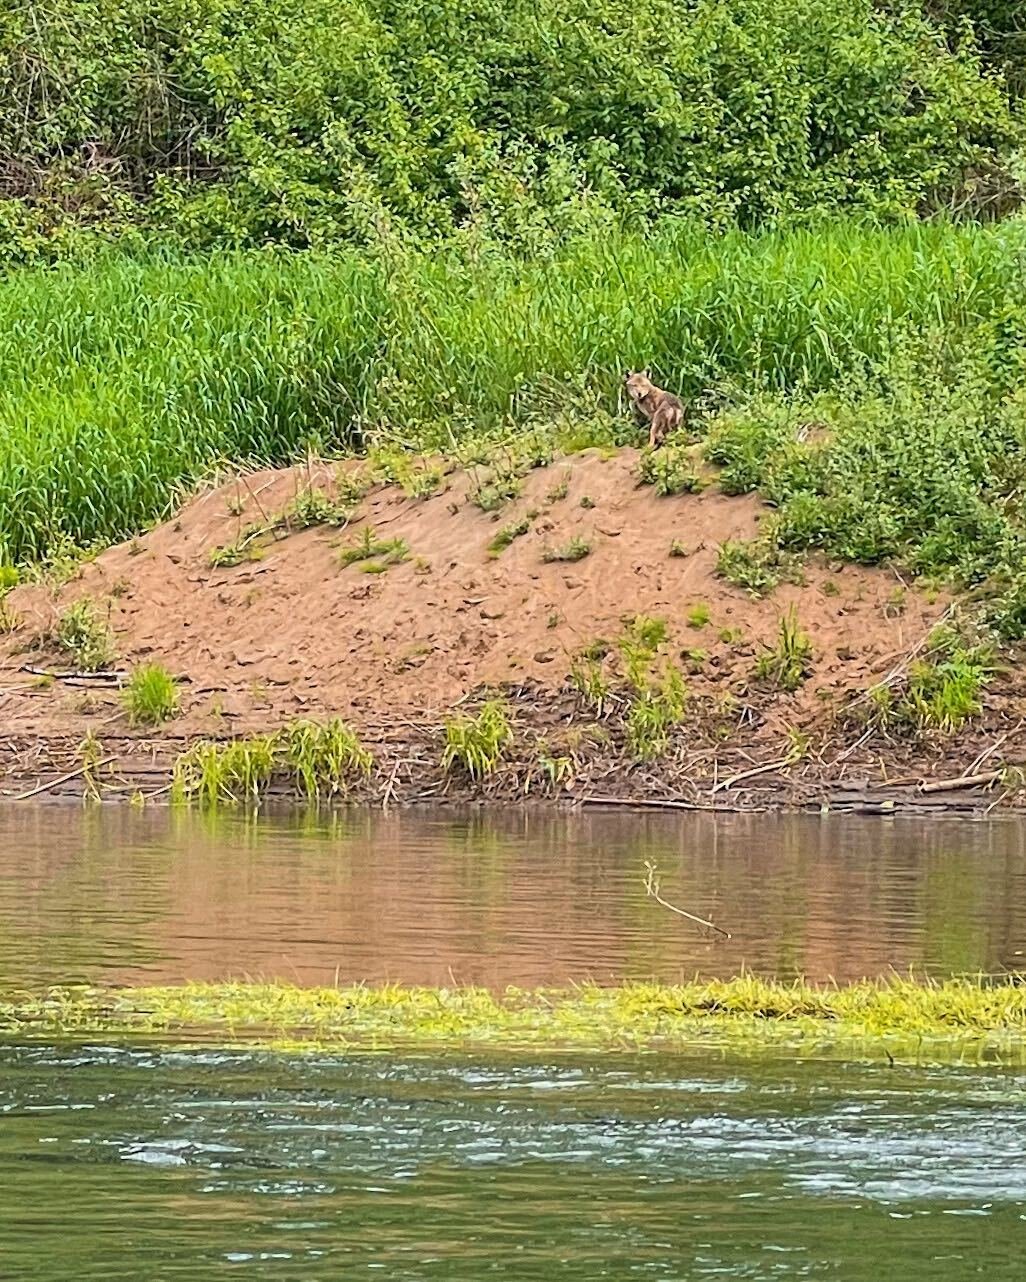 A young coyote looks on from grass along the Chehalis River in Centralia.